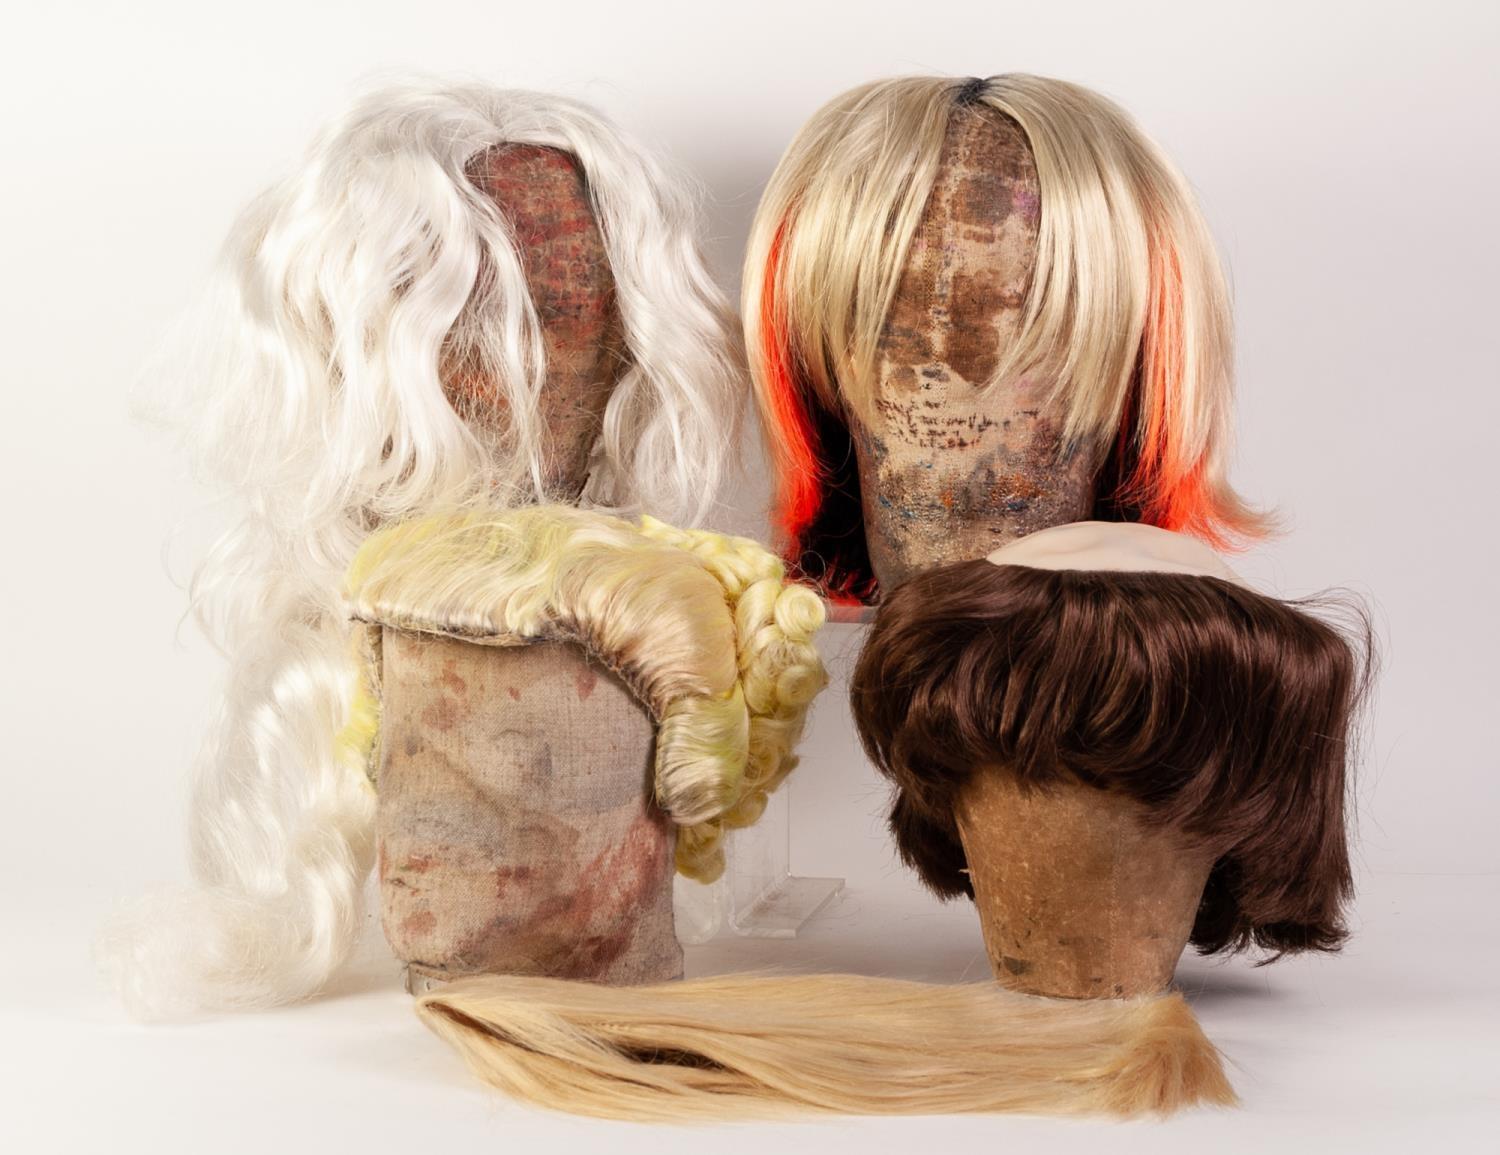 TWENTY ASSORTED PERIOD AND CHARACTER SYNTHETIC WIGS, individually bagged, contents of one box